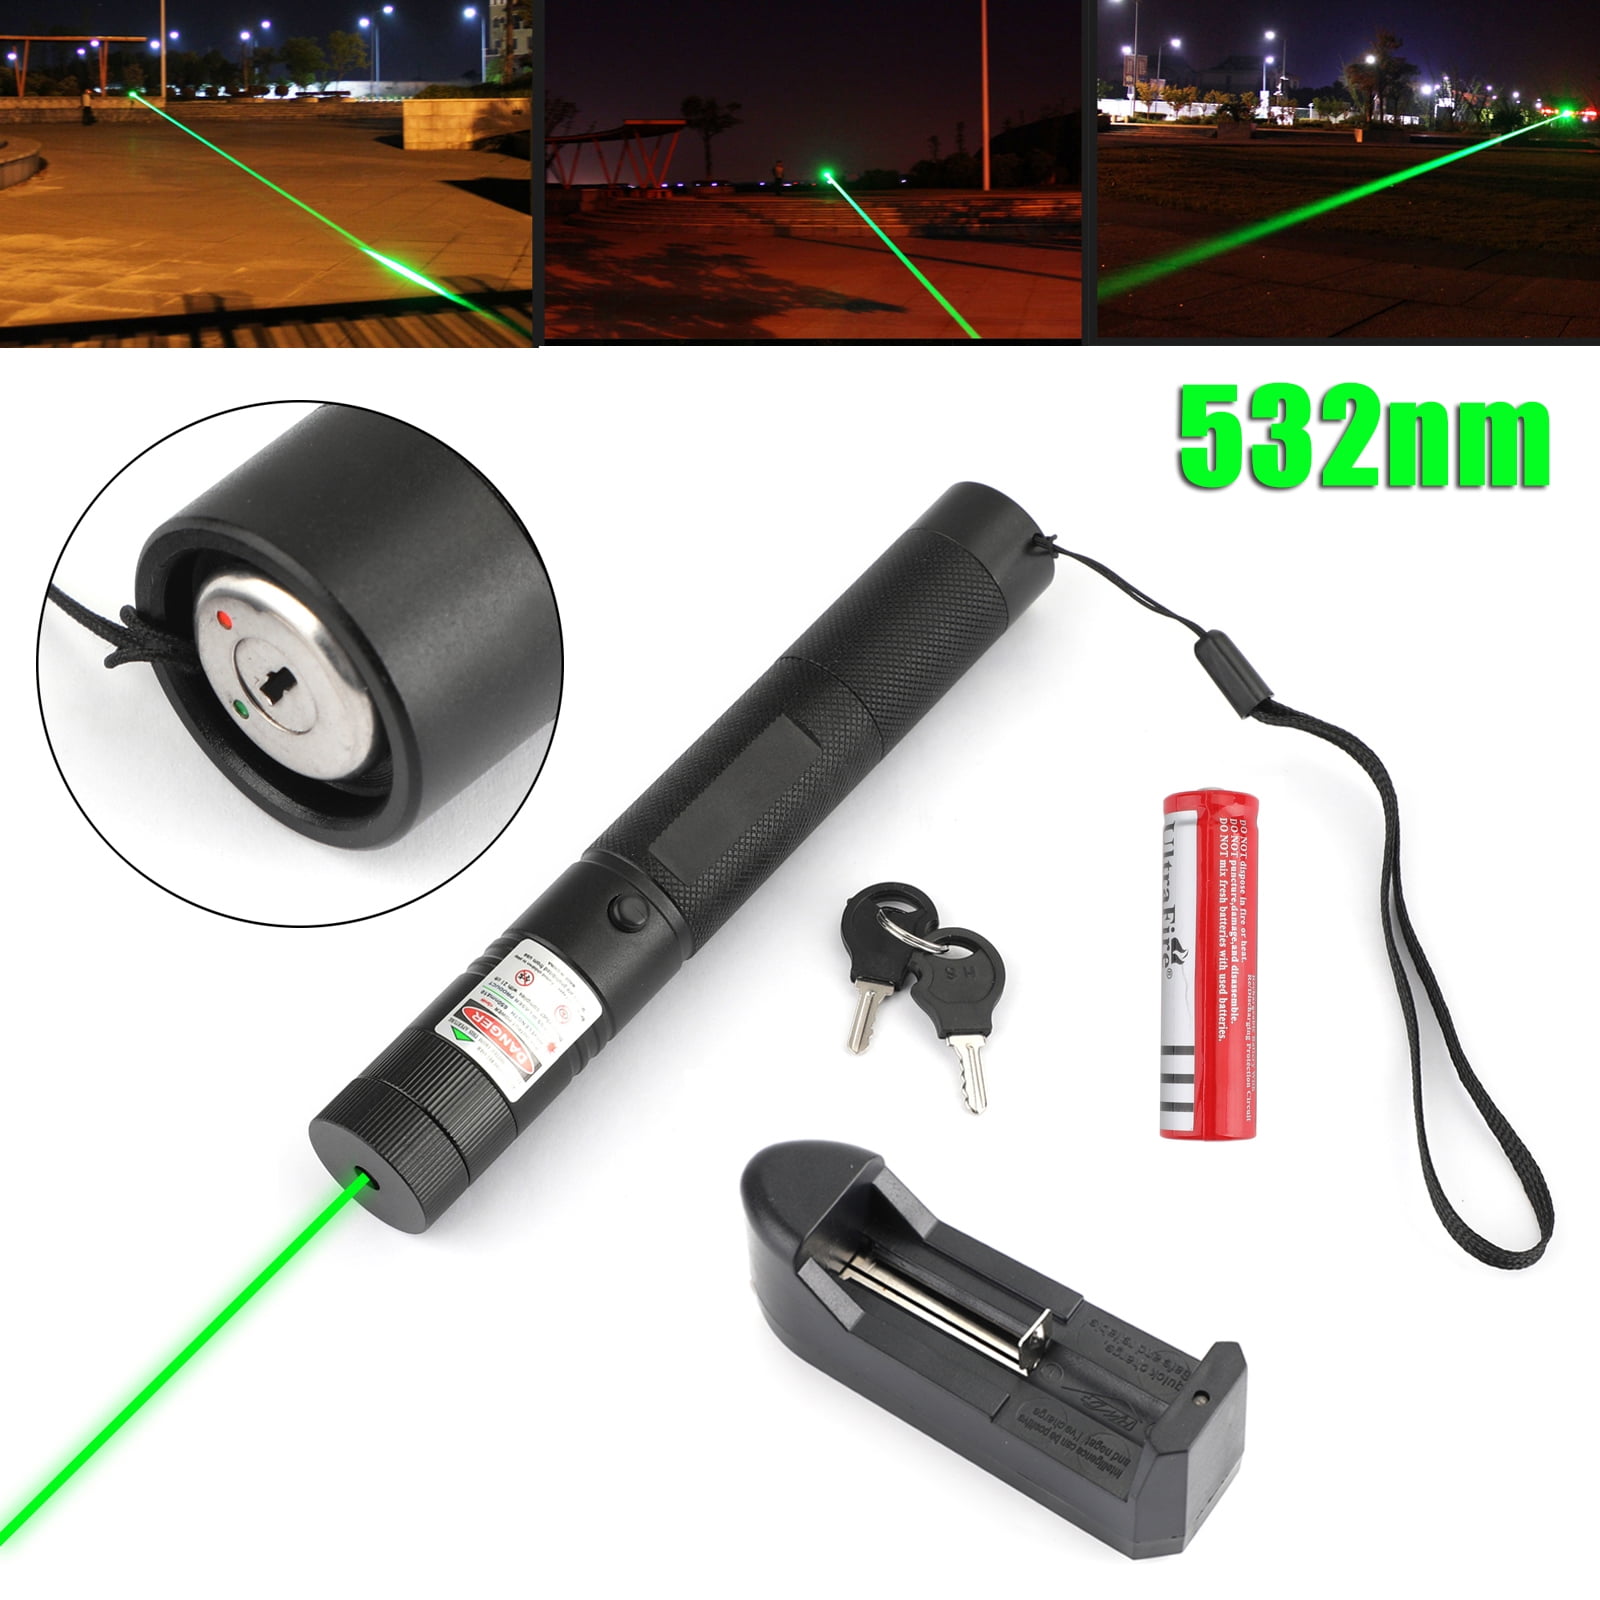 532nm 303 Green Laser Pointer Pen Visible Beam Light 18650 Battery Charger USA 